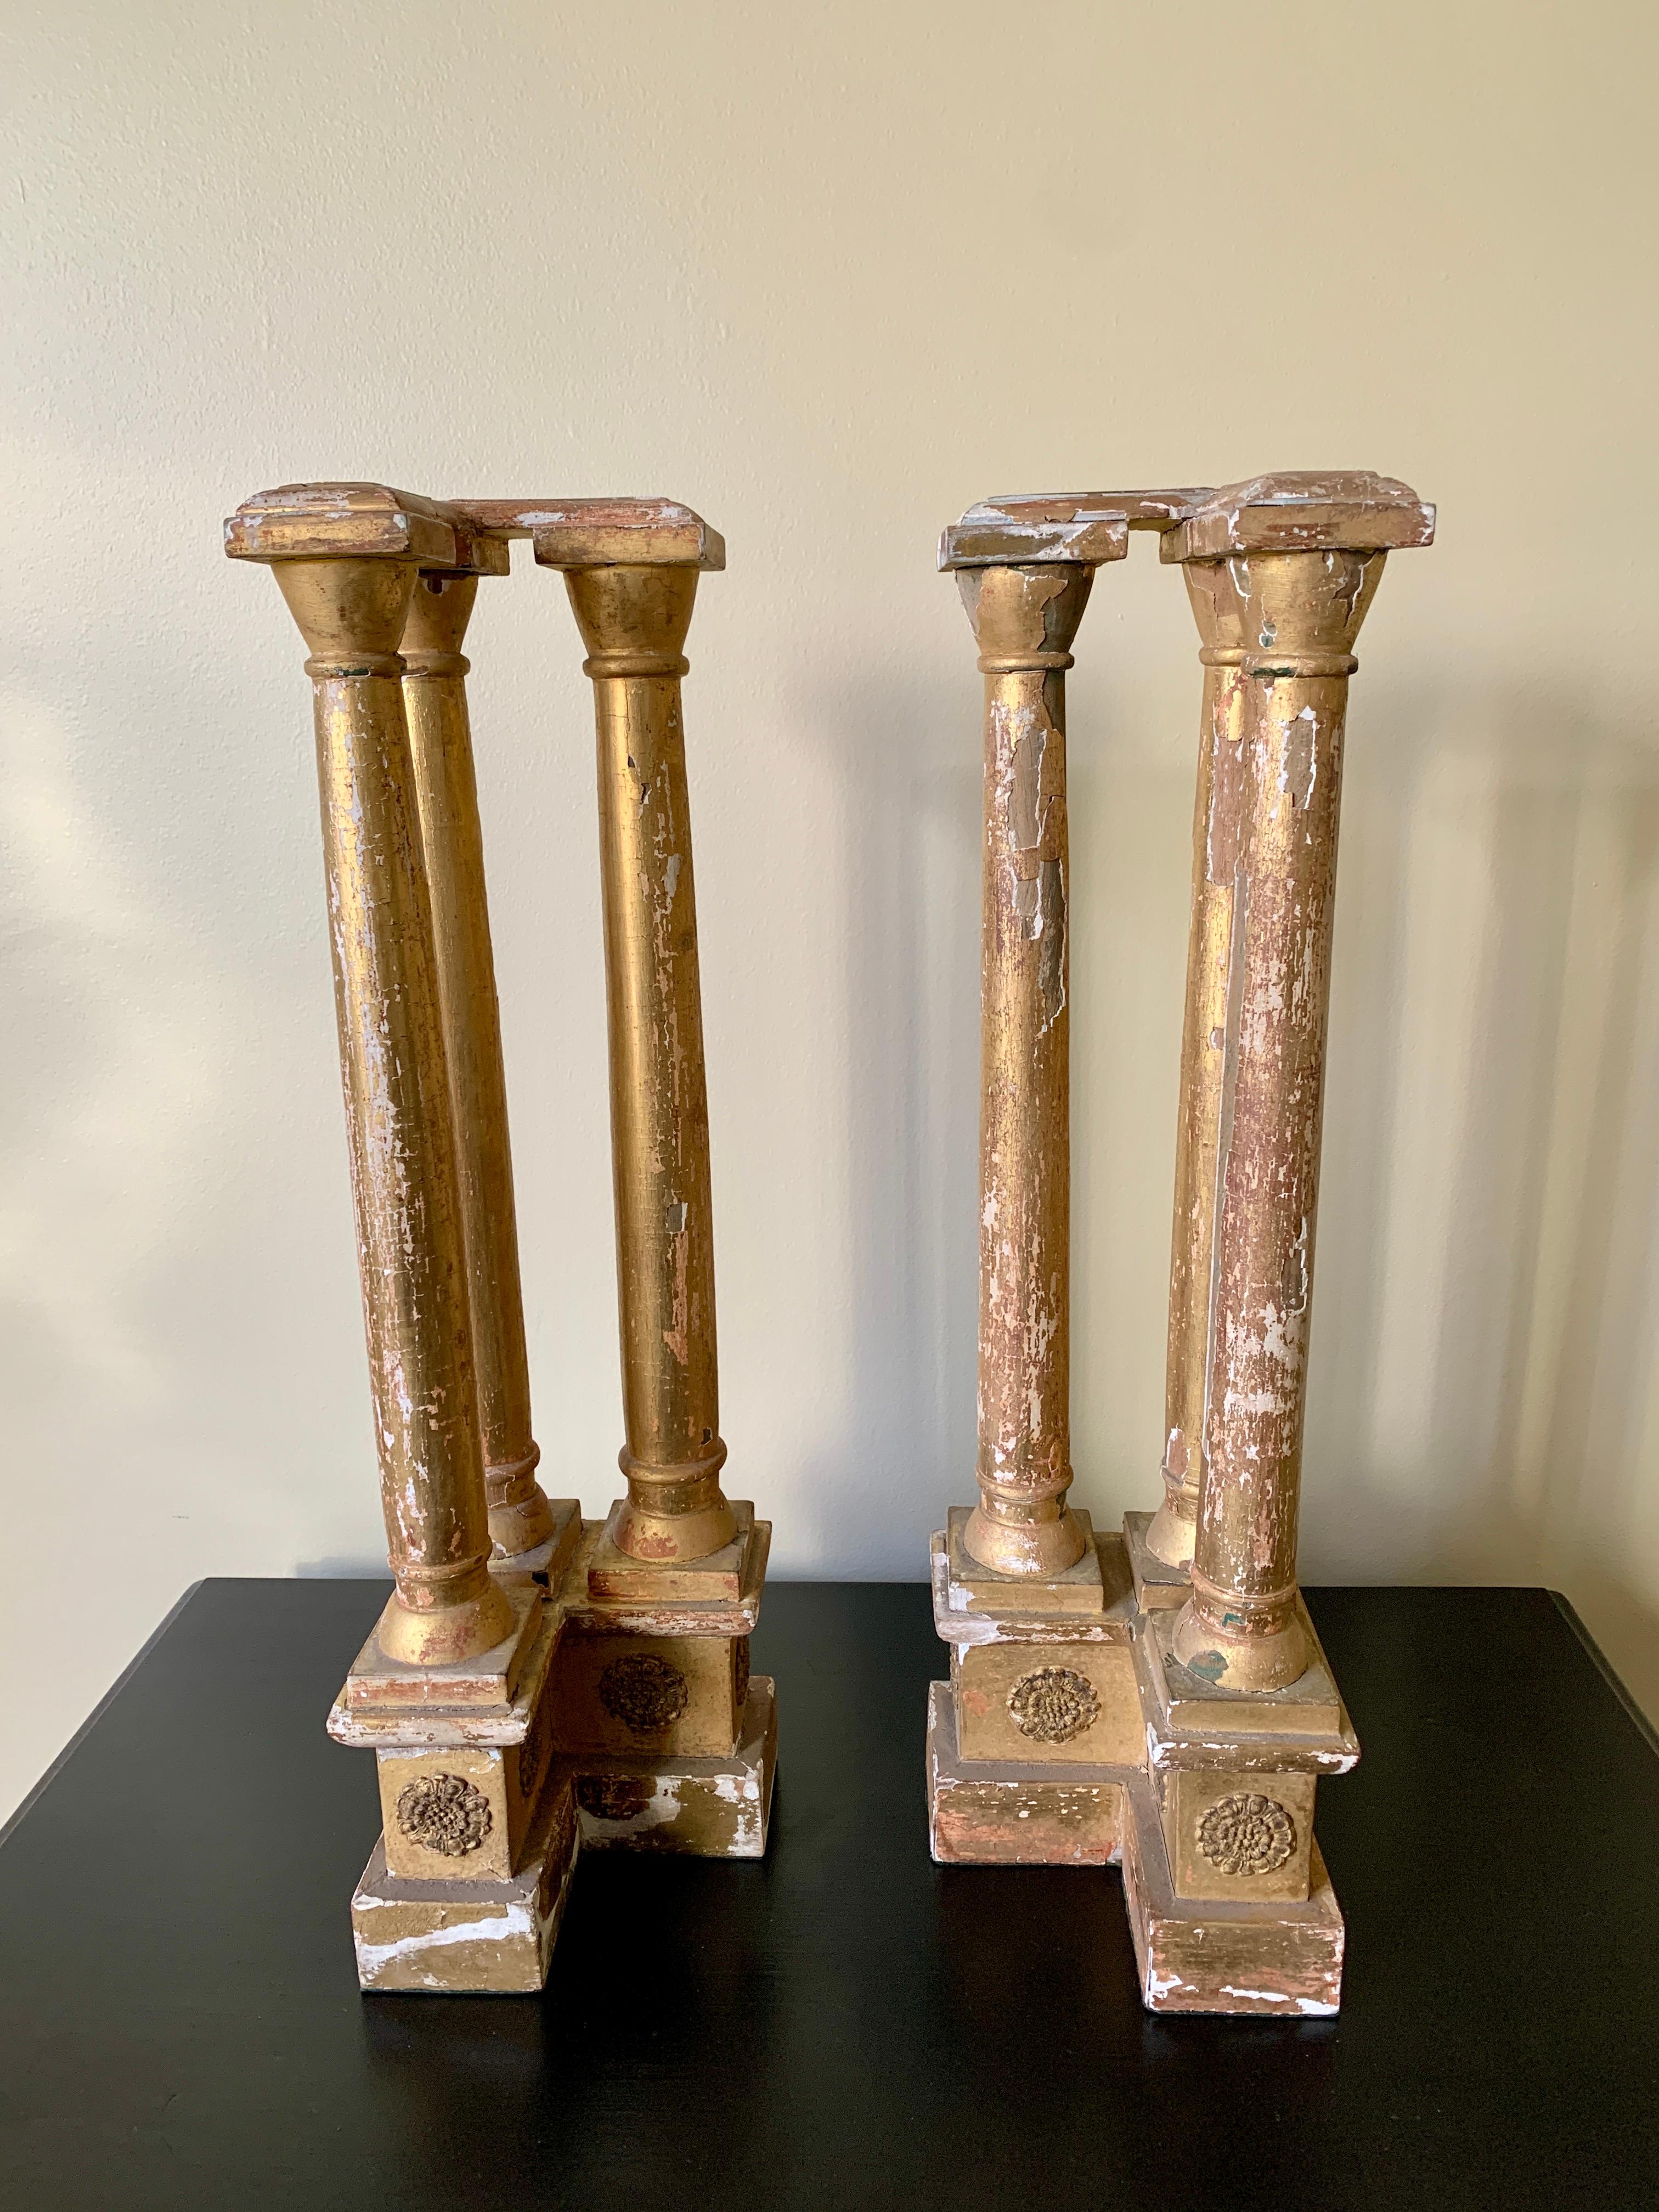 A stunning pair of Grand Tour or Neoclassical gilt wood architectural tabletop columns. 

Italy, Early 20th Century

Measures: 5.13